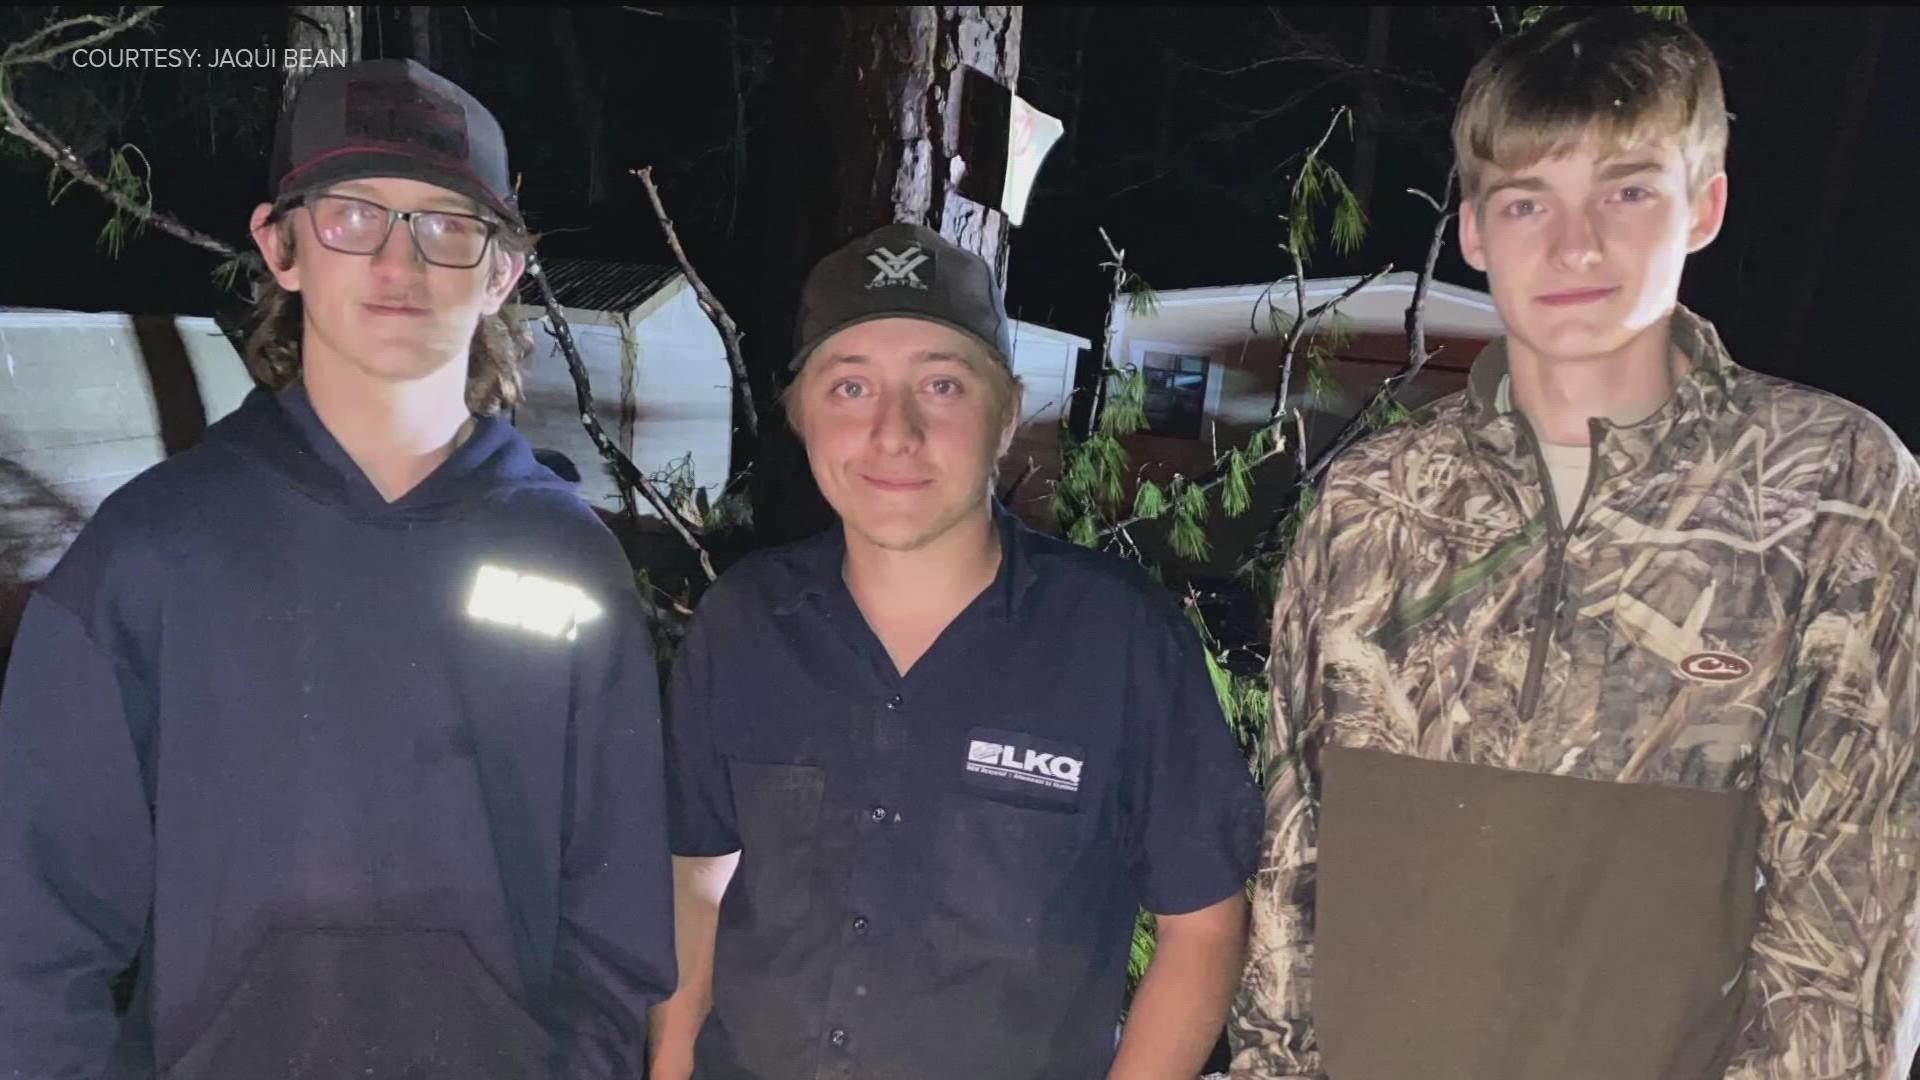 Nicolette said these young men helped so many people get back to their homes-- clearing out trees so residents and emergency crews could get by after the storms.